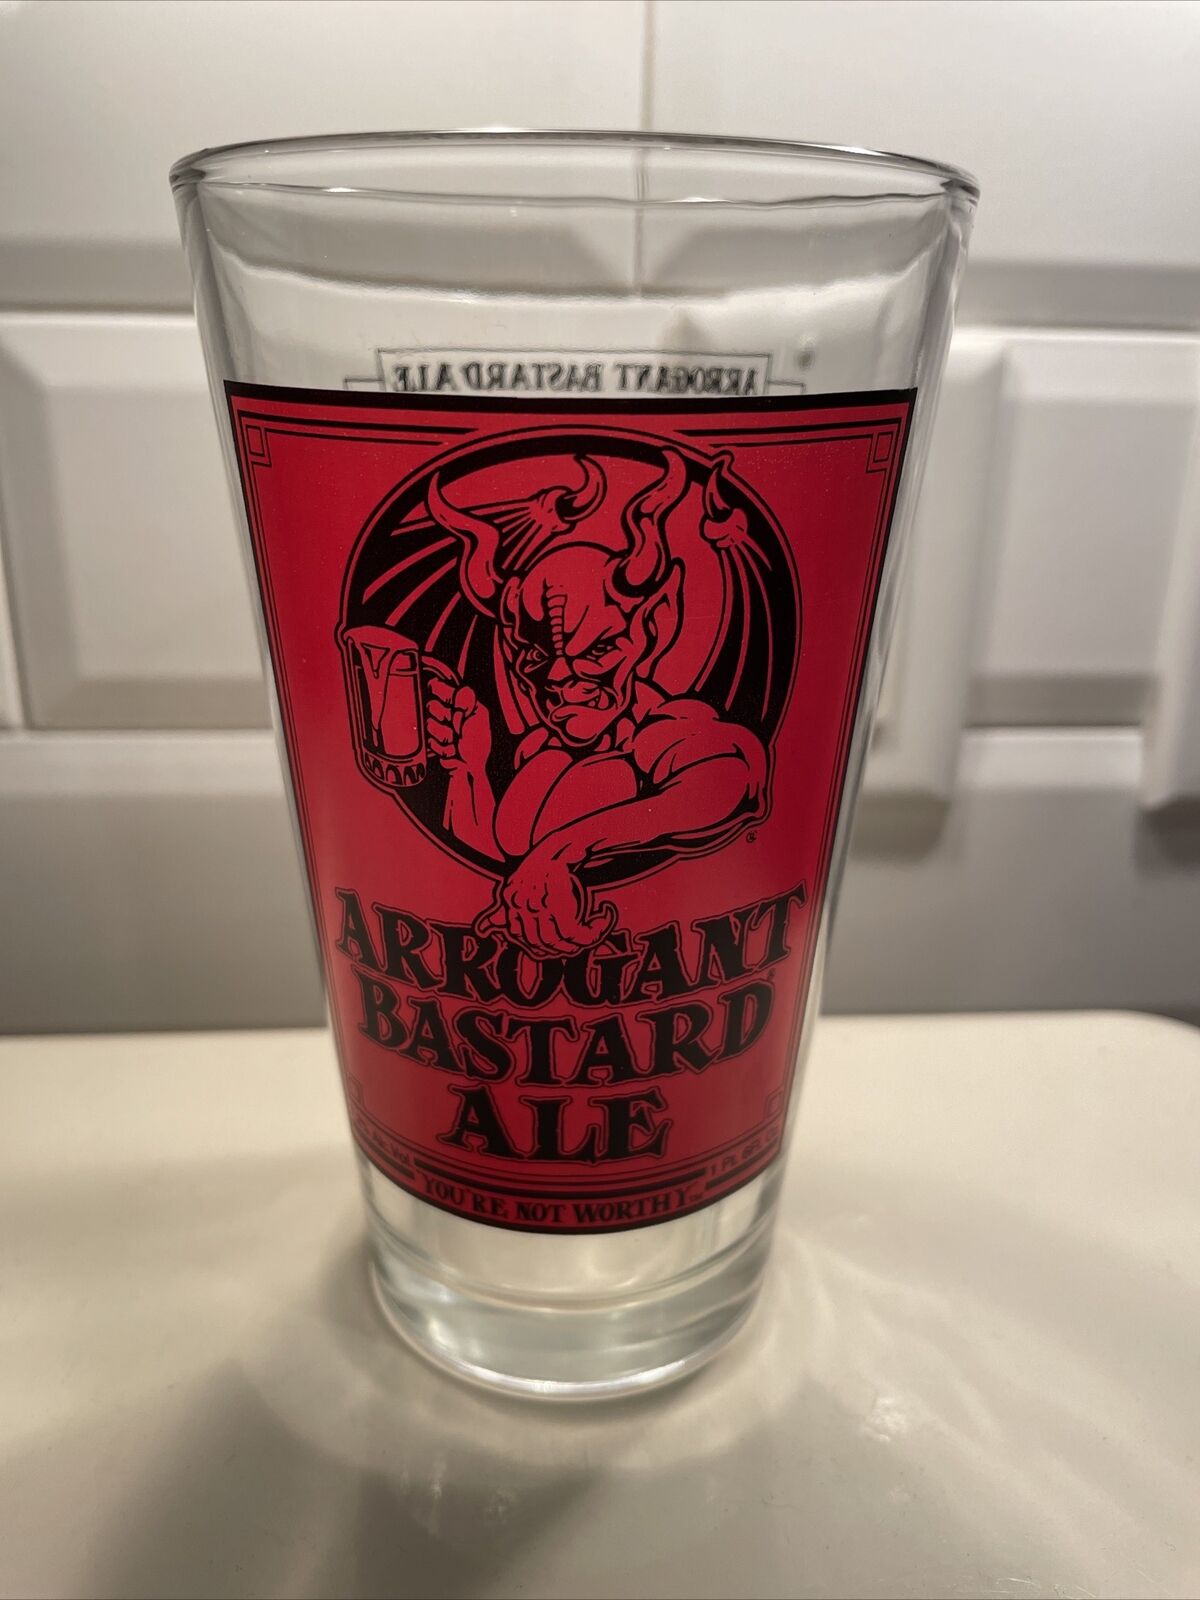 Arrogant Bastard Ale - Stone Brewing Beer Pint Glass - “You\'re Not Worthy”